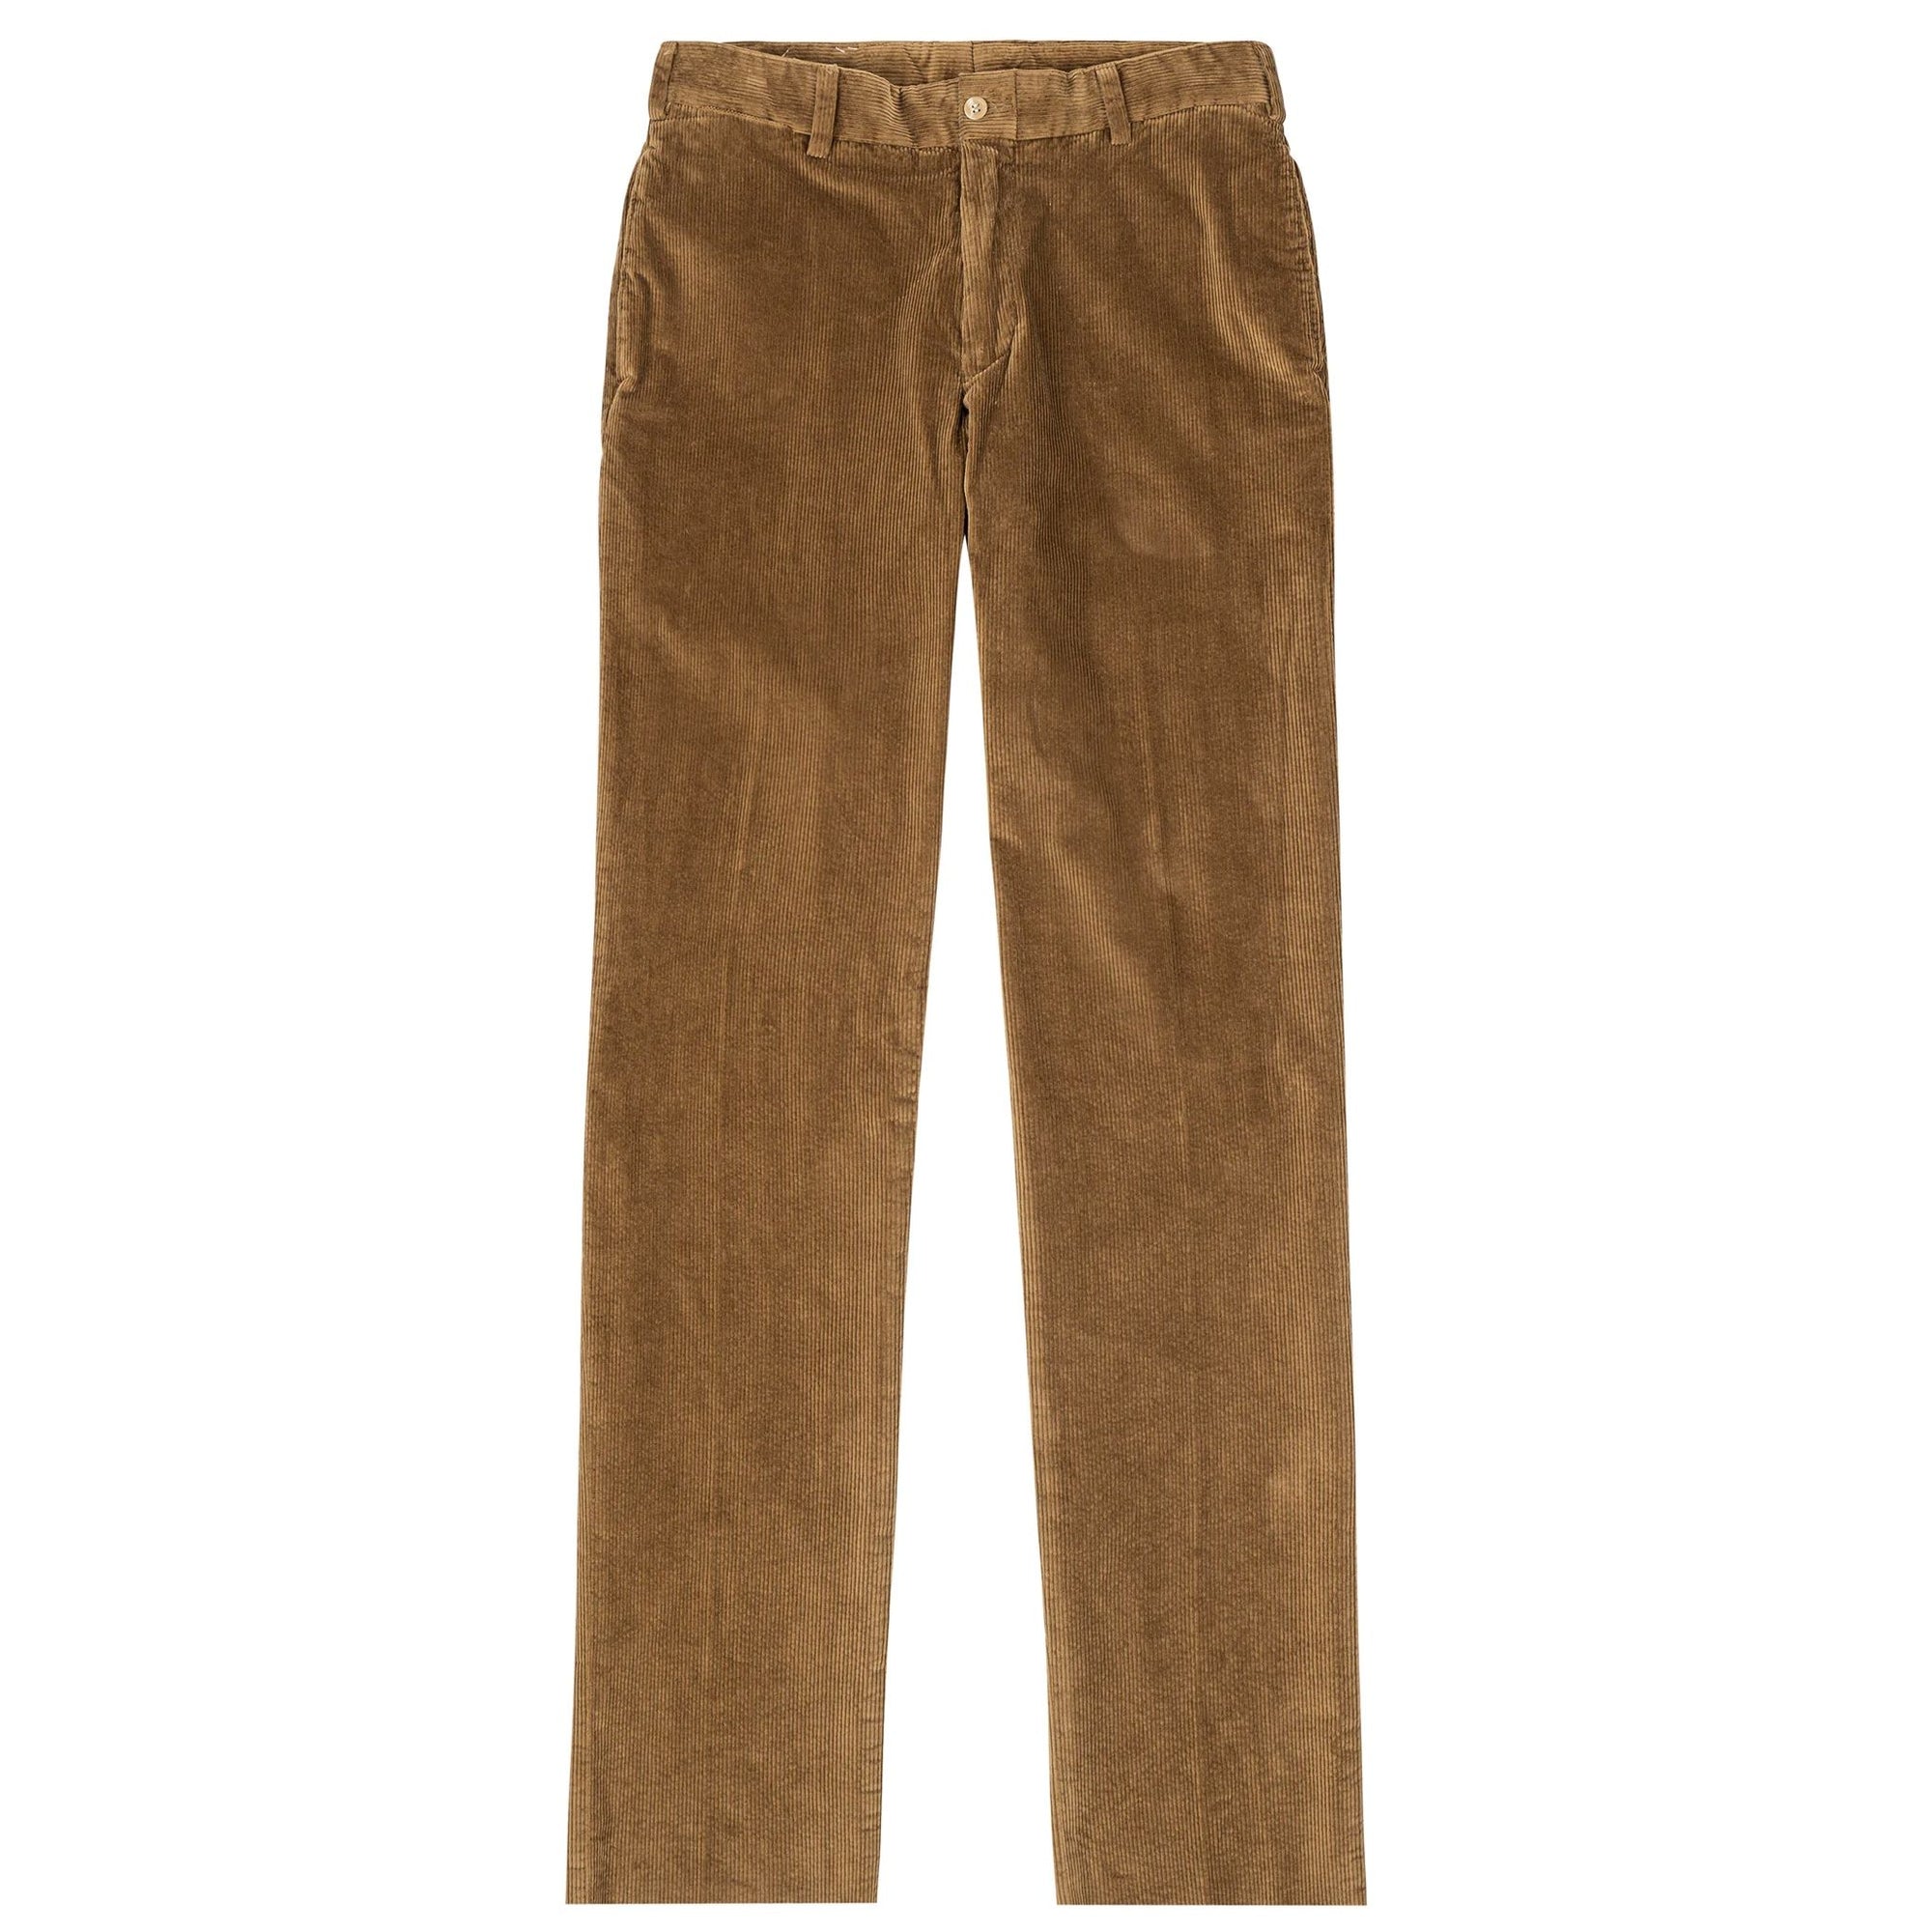 M2 Classic Fit Stretch 9 Wale Cords in British Khaki by Bills Khakis